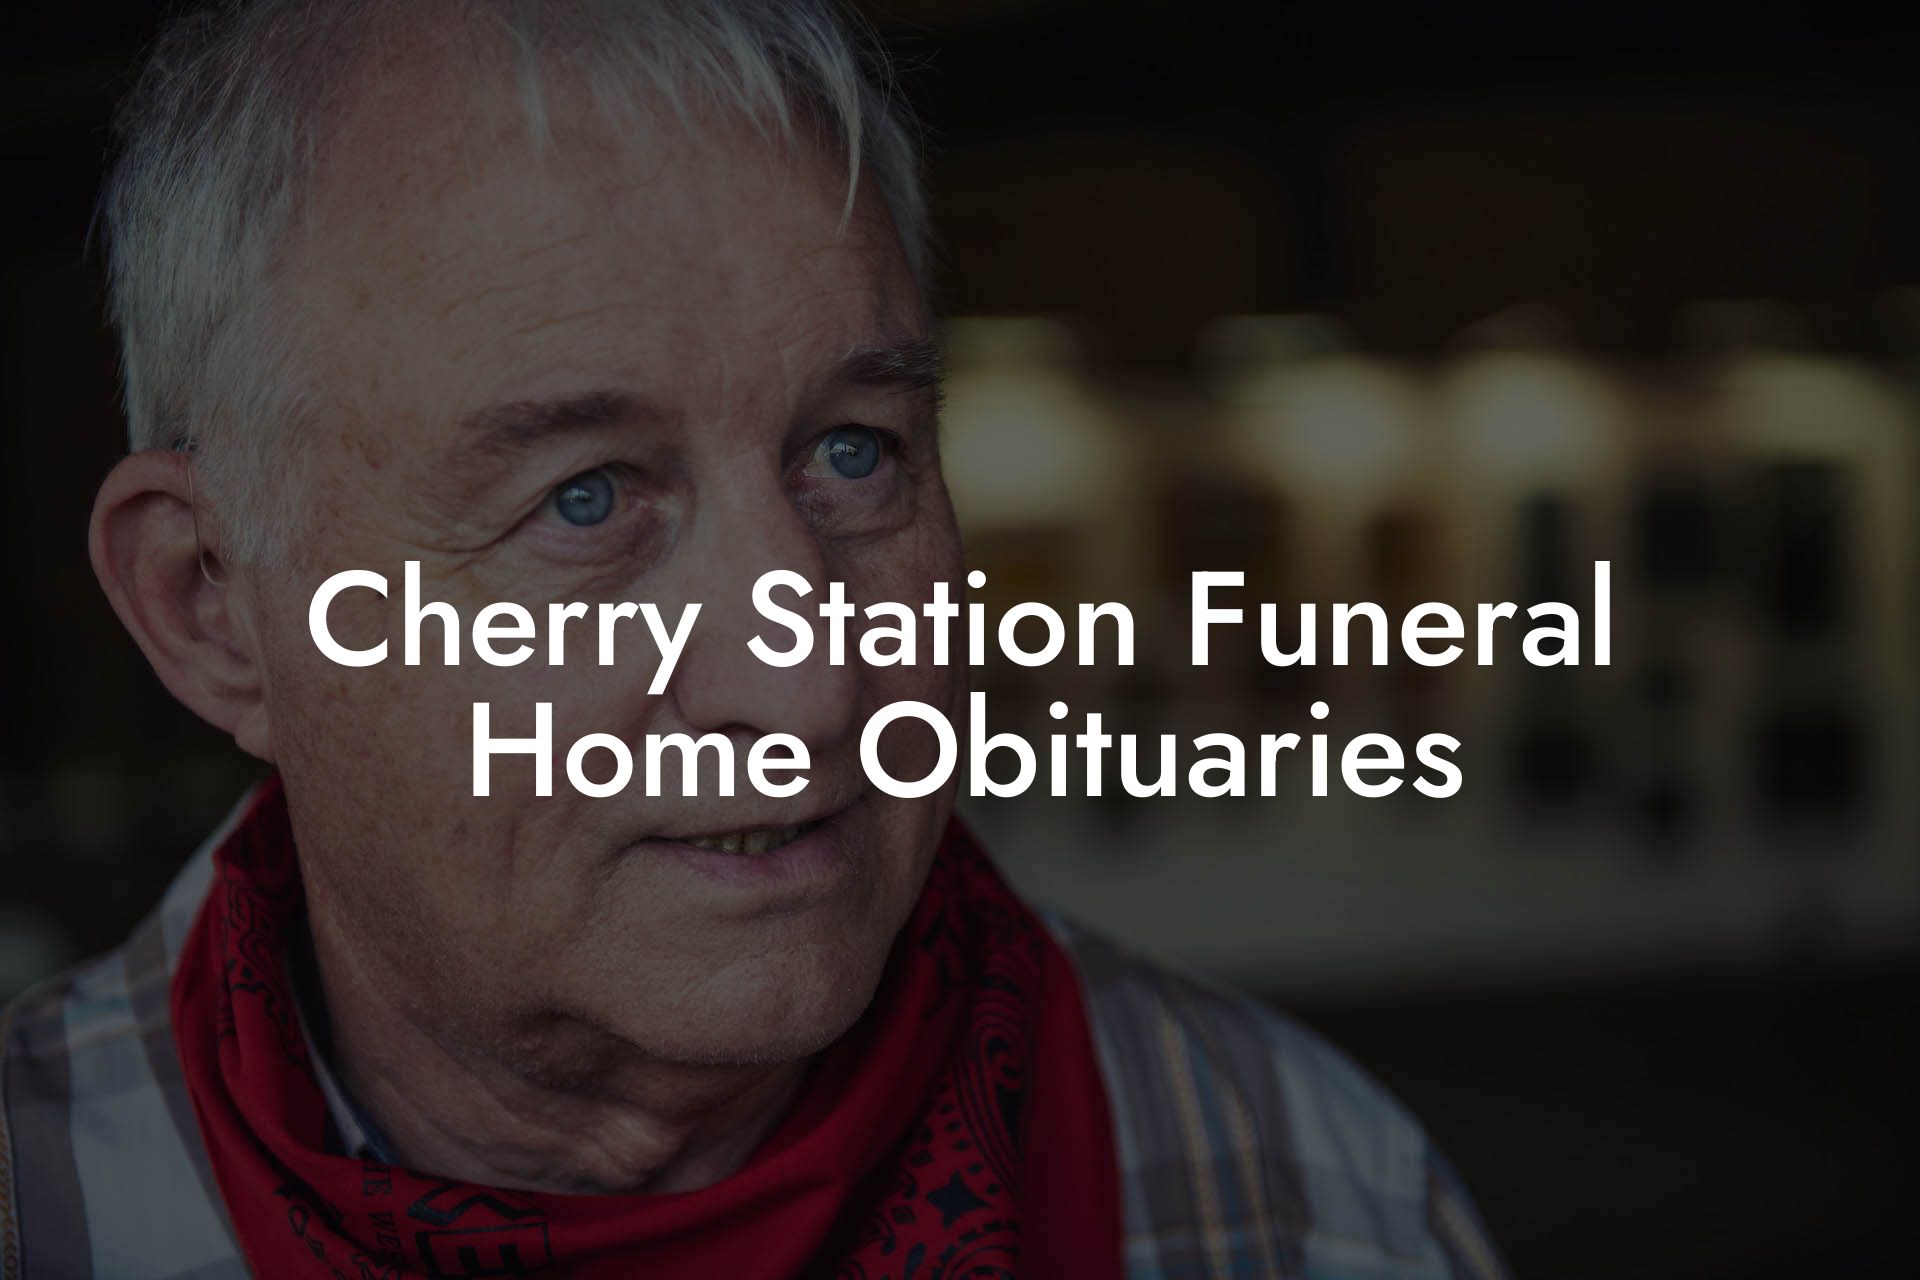 Cherry Station Funeral Home Obituaries